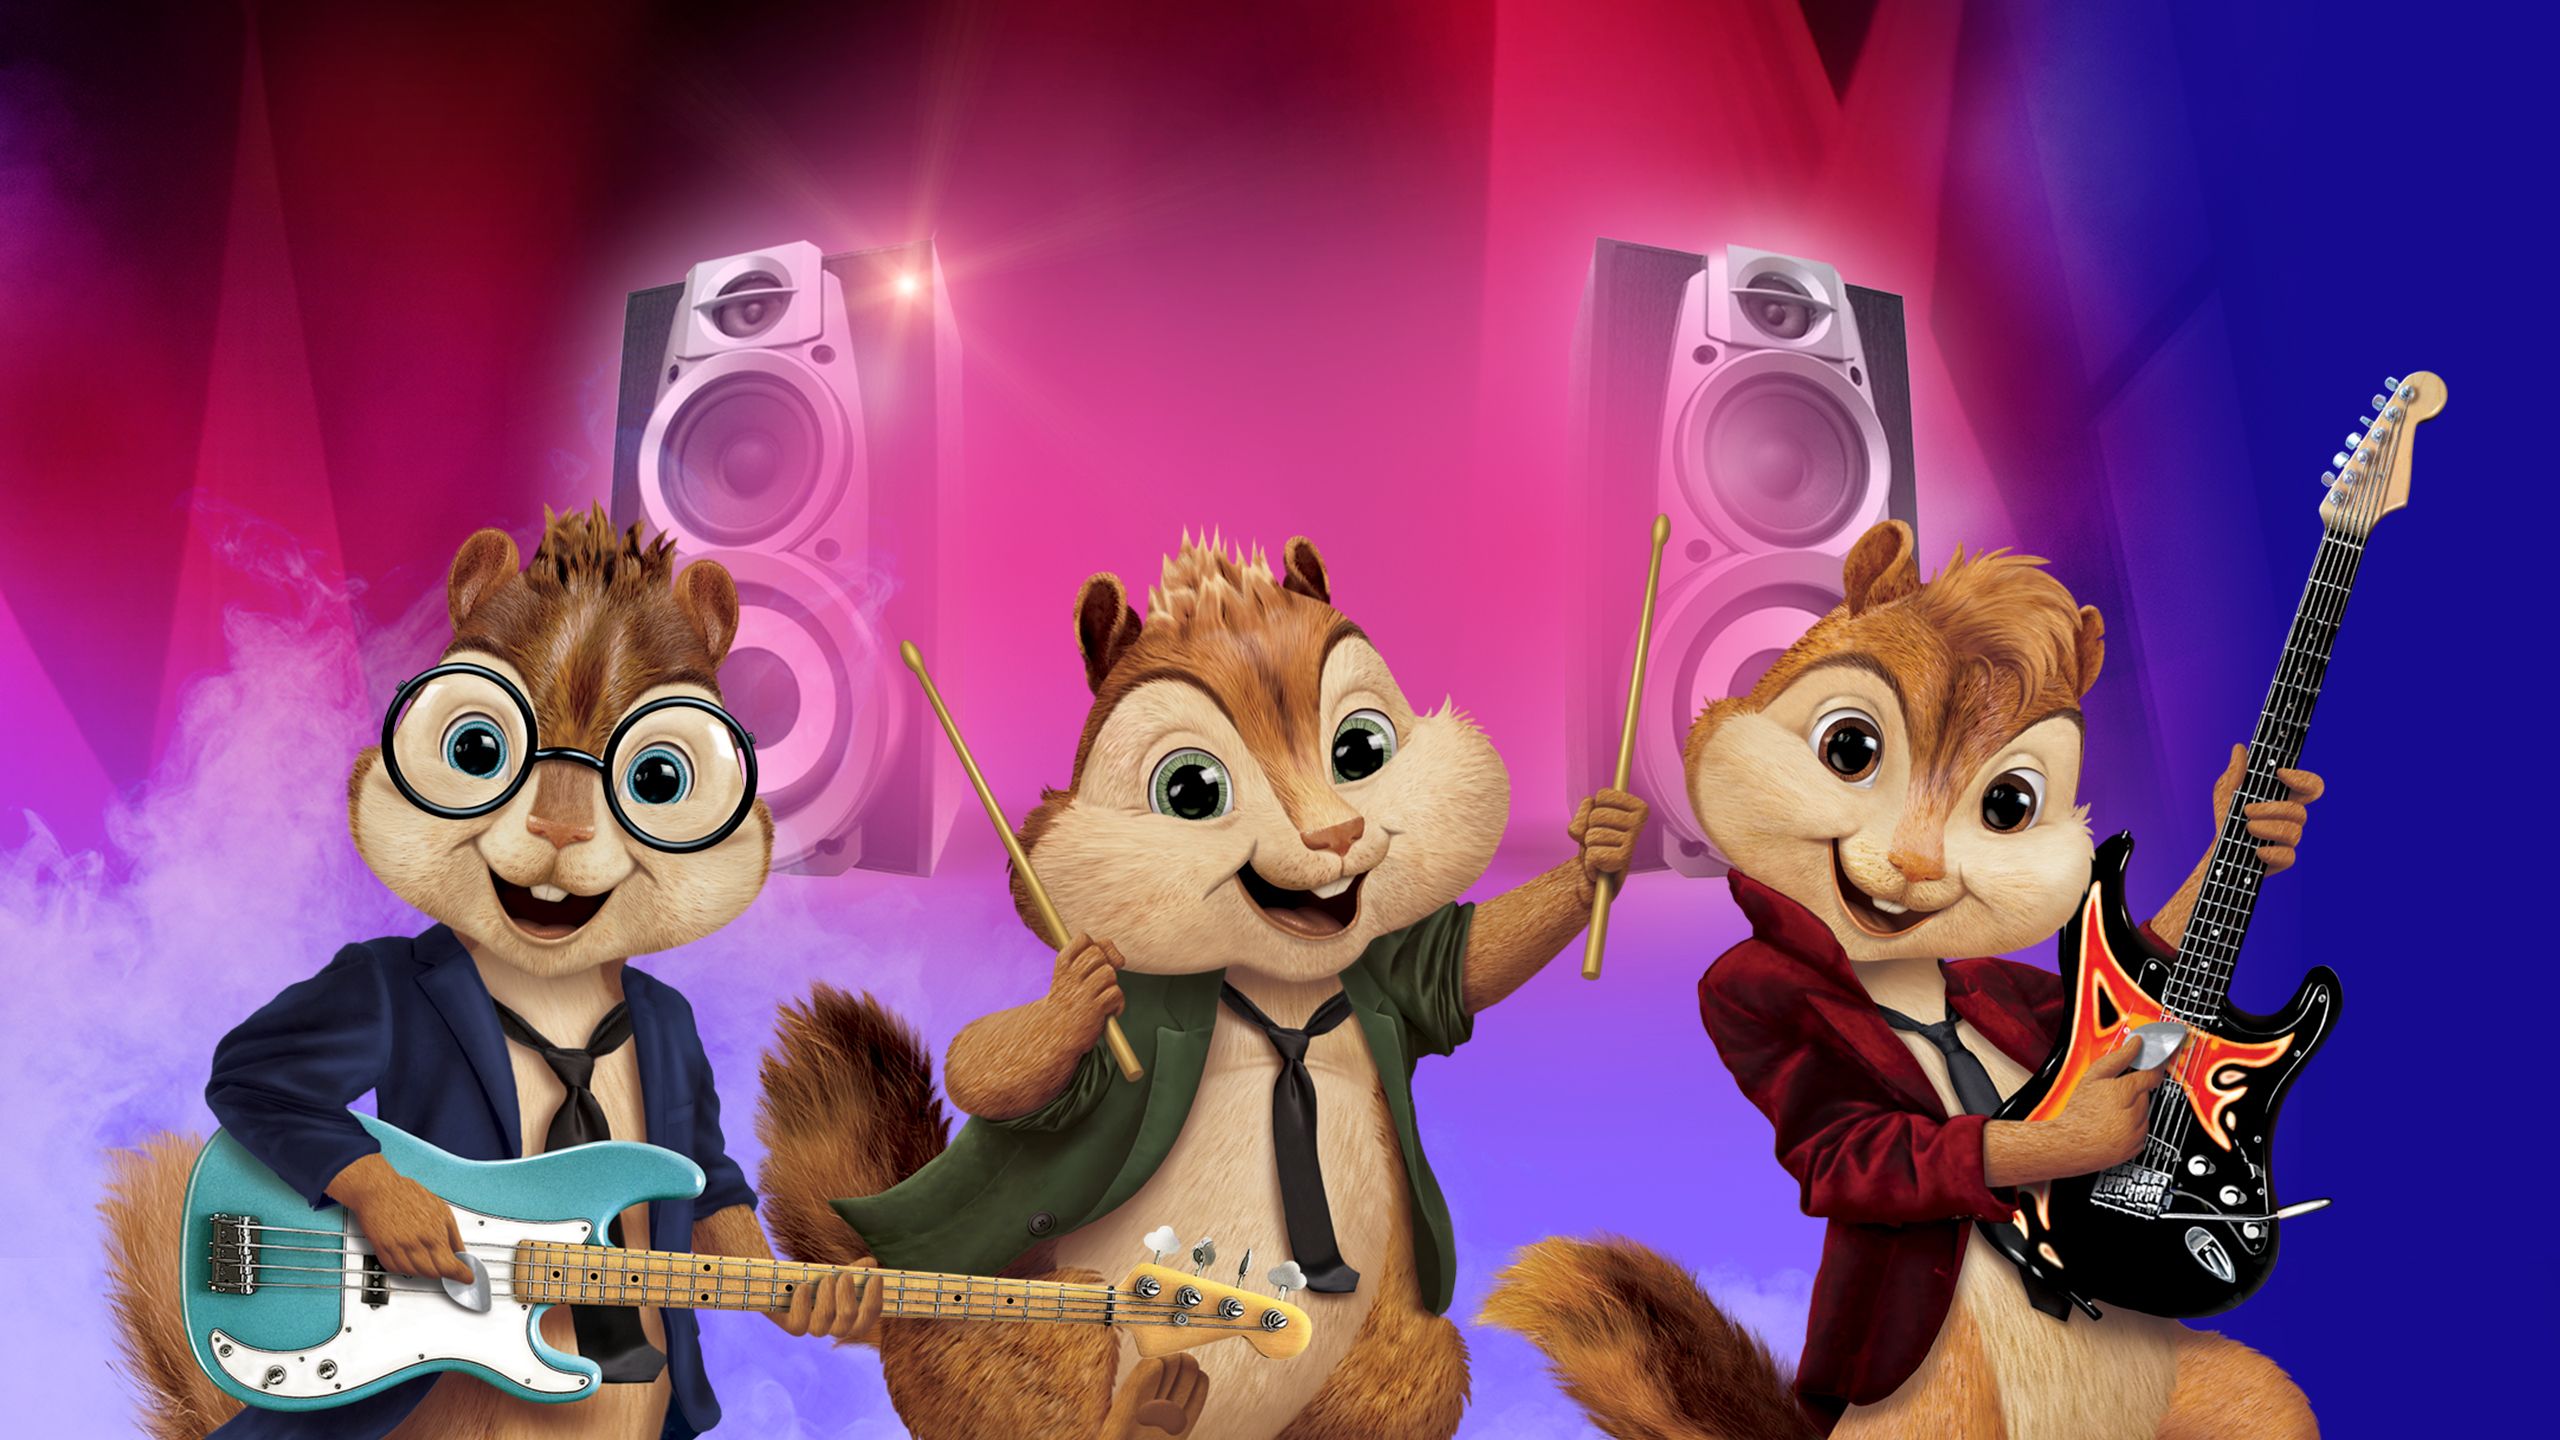  Alvin and the Chipmunks are shown in concert with the caption 'Alvin Gauthier and the Lamb family connected by WWII letter' to illustrate the search query.